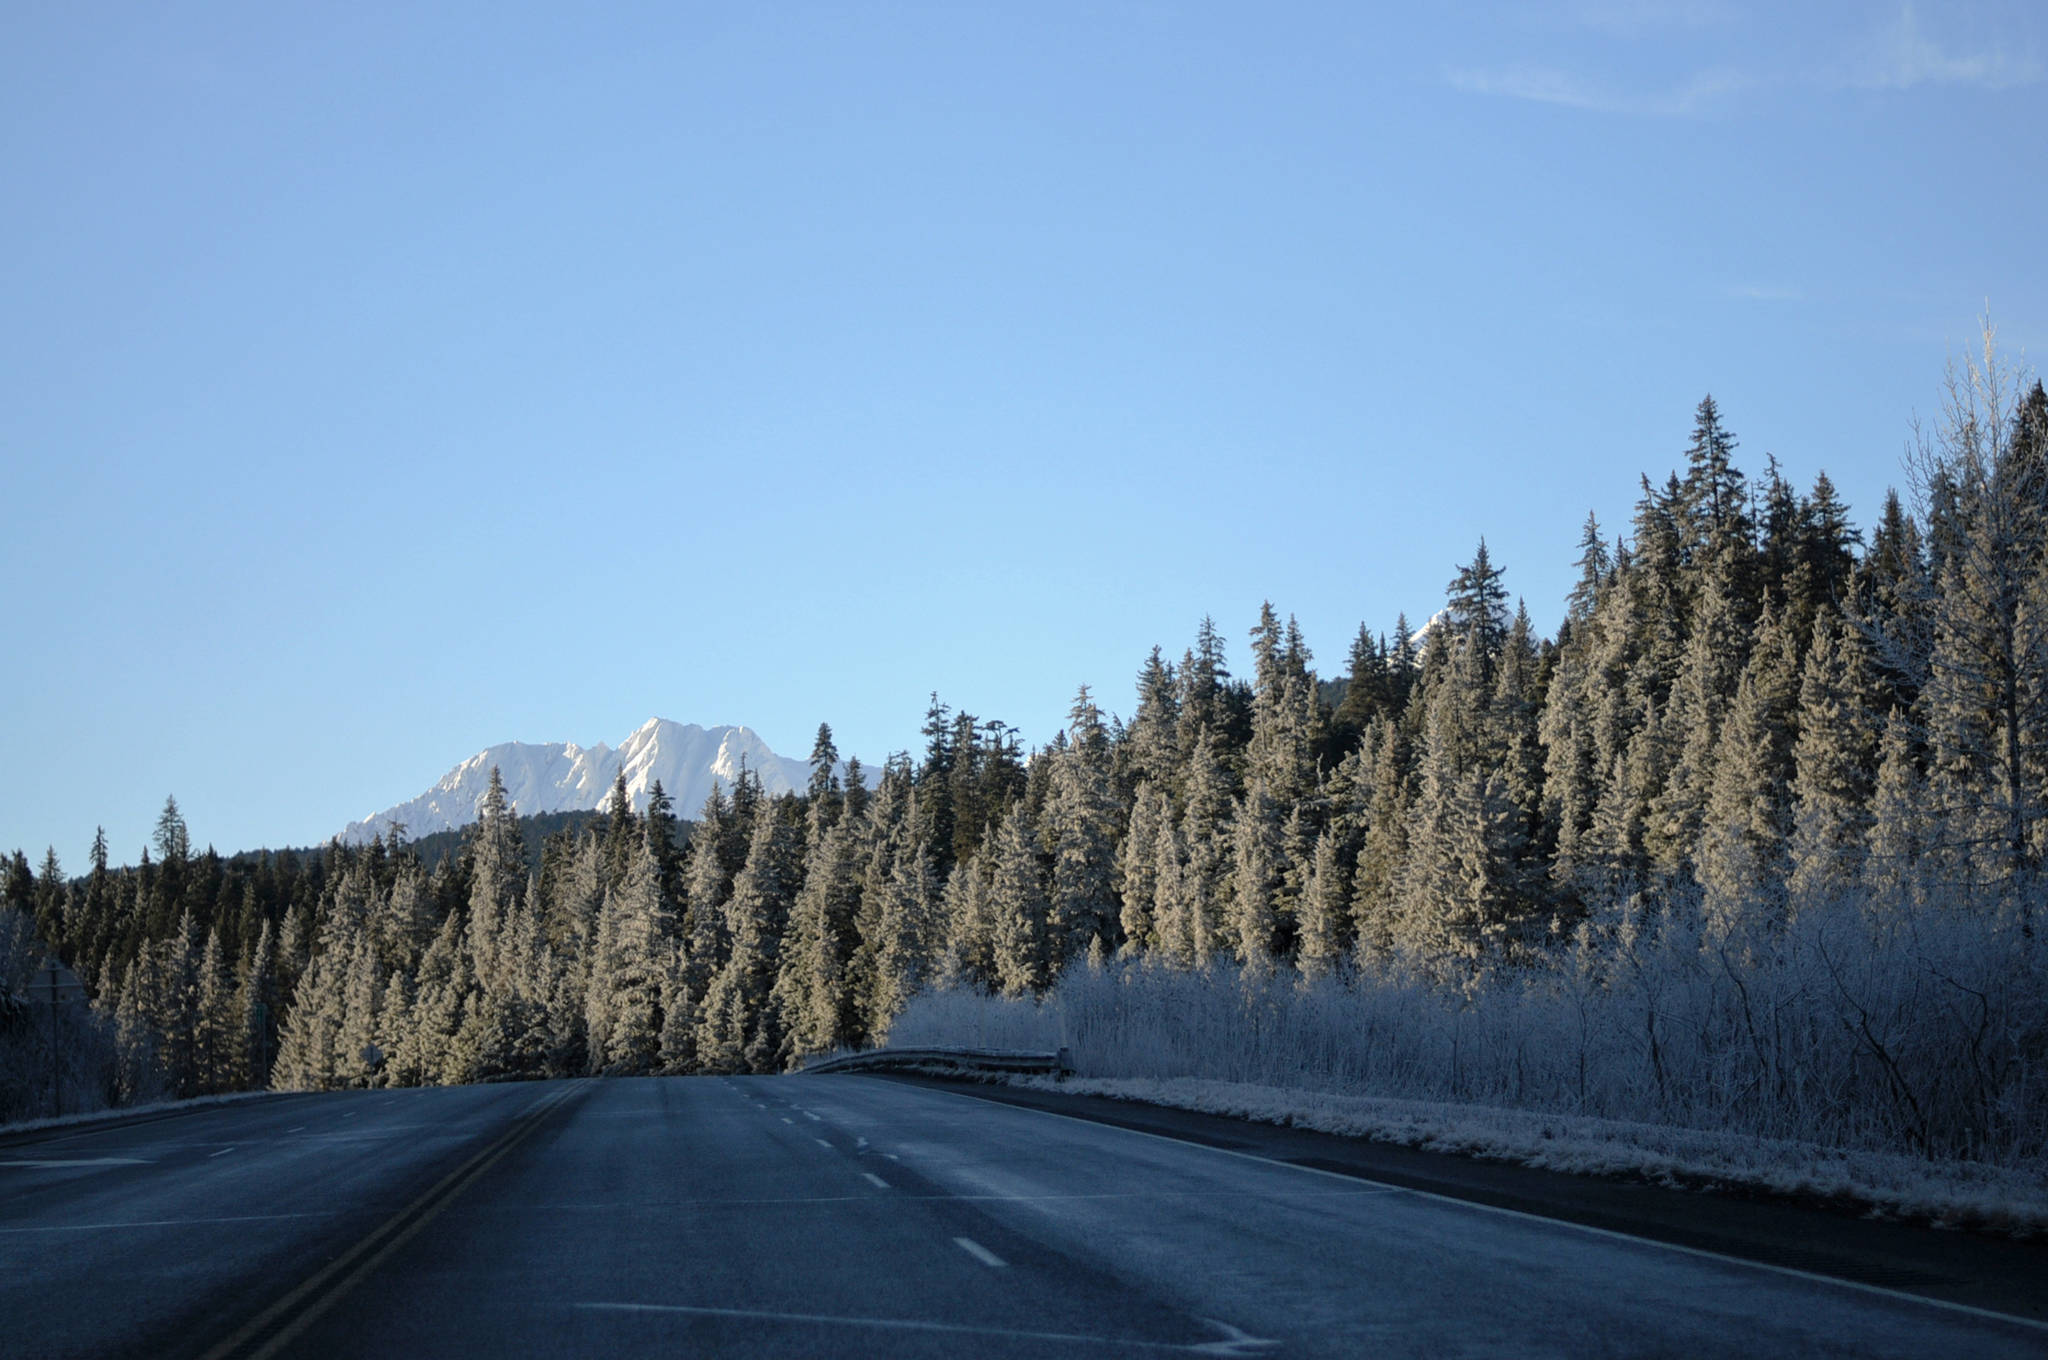 In this November 2016 photo, the Seward Highway stretches southward toward the town of Seward near Moose Pass, Alaska. The Kenai Peninsula Borough Assembly recently approved an ordinance forming an emergency medical service area corridor along the highway system on the eastern Kenai Peninsula to provide more thorough emergency response coverage for the thousands of travelers that cross the highway every year. (Elizabeth Earl/Peninsula Clarion, file)